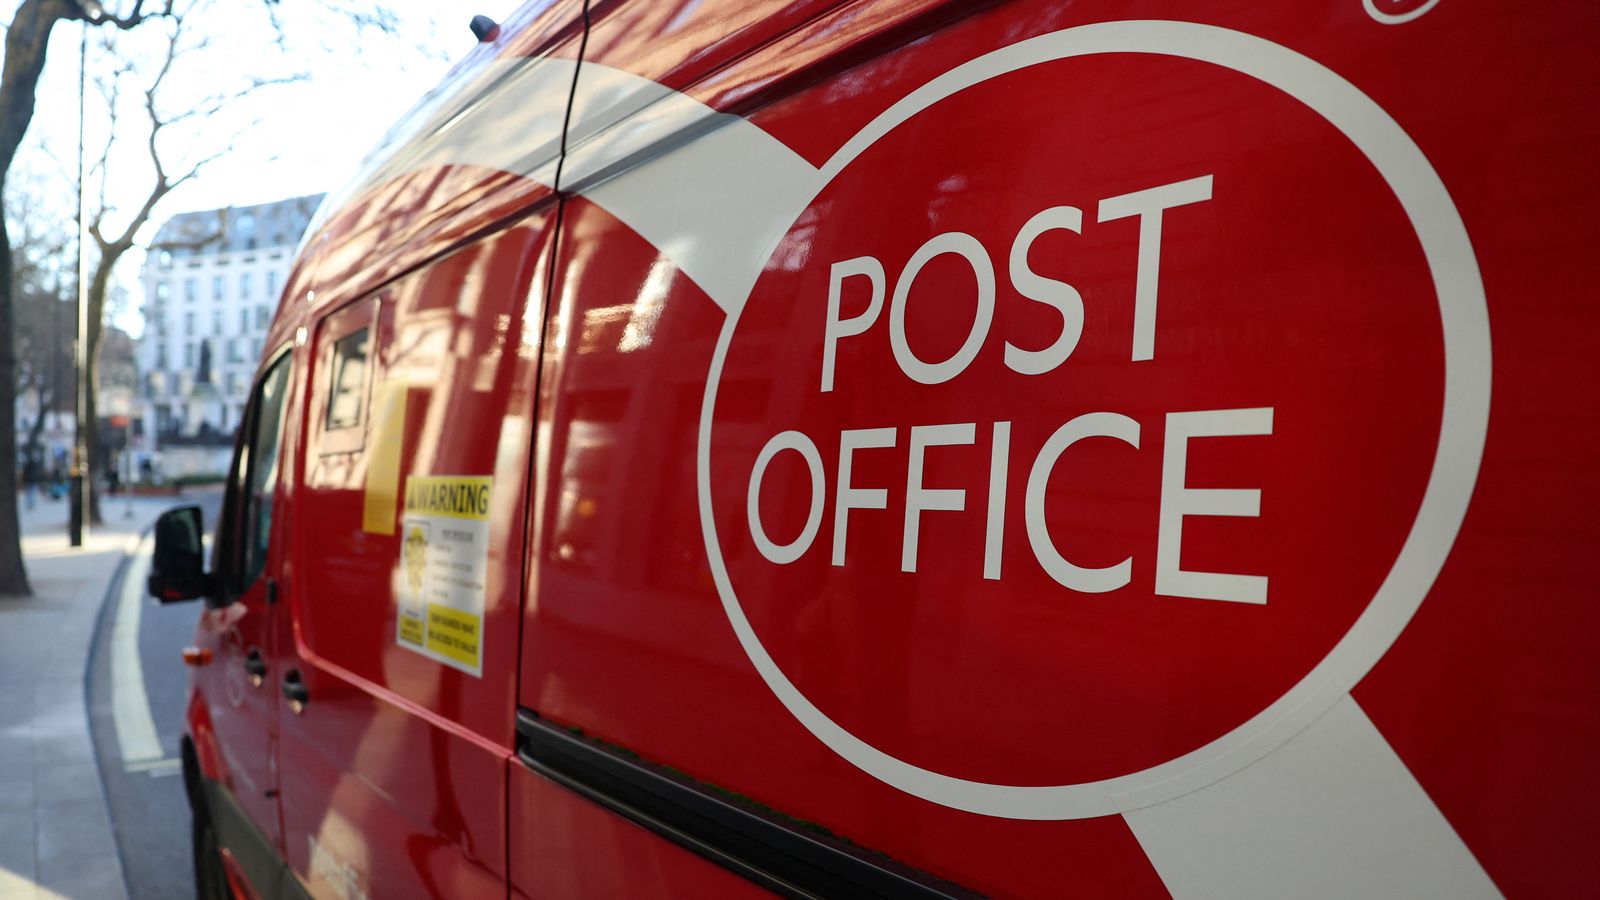 Exonerating guilty people ‘price worth paying’ to resolve Post Office scandal, government says | Business News